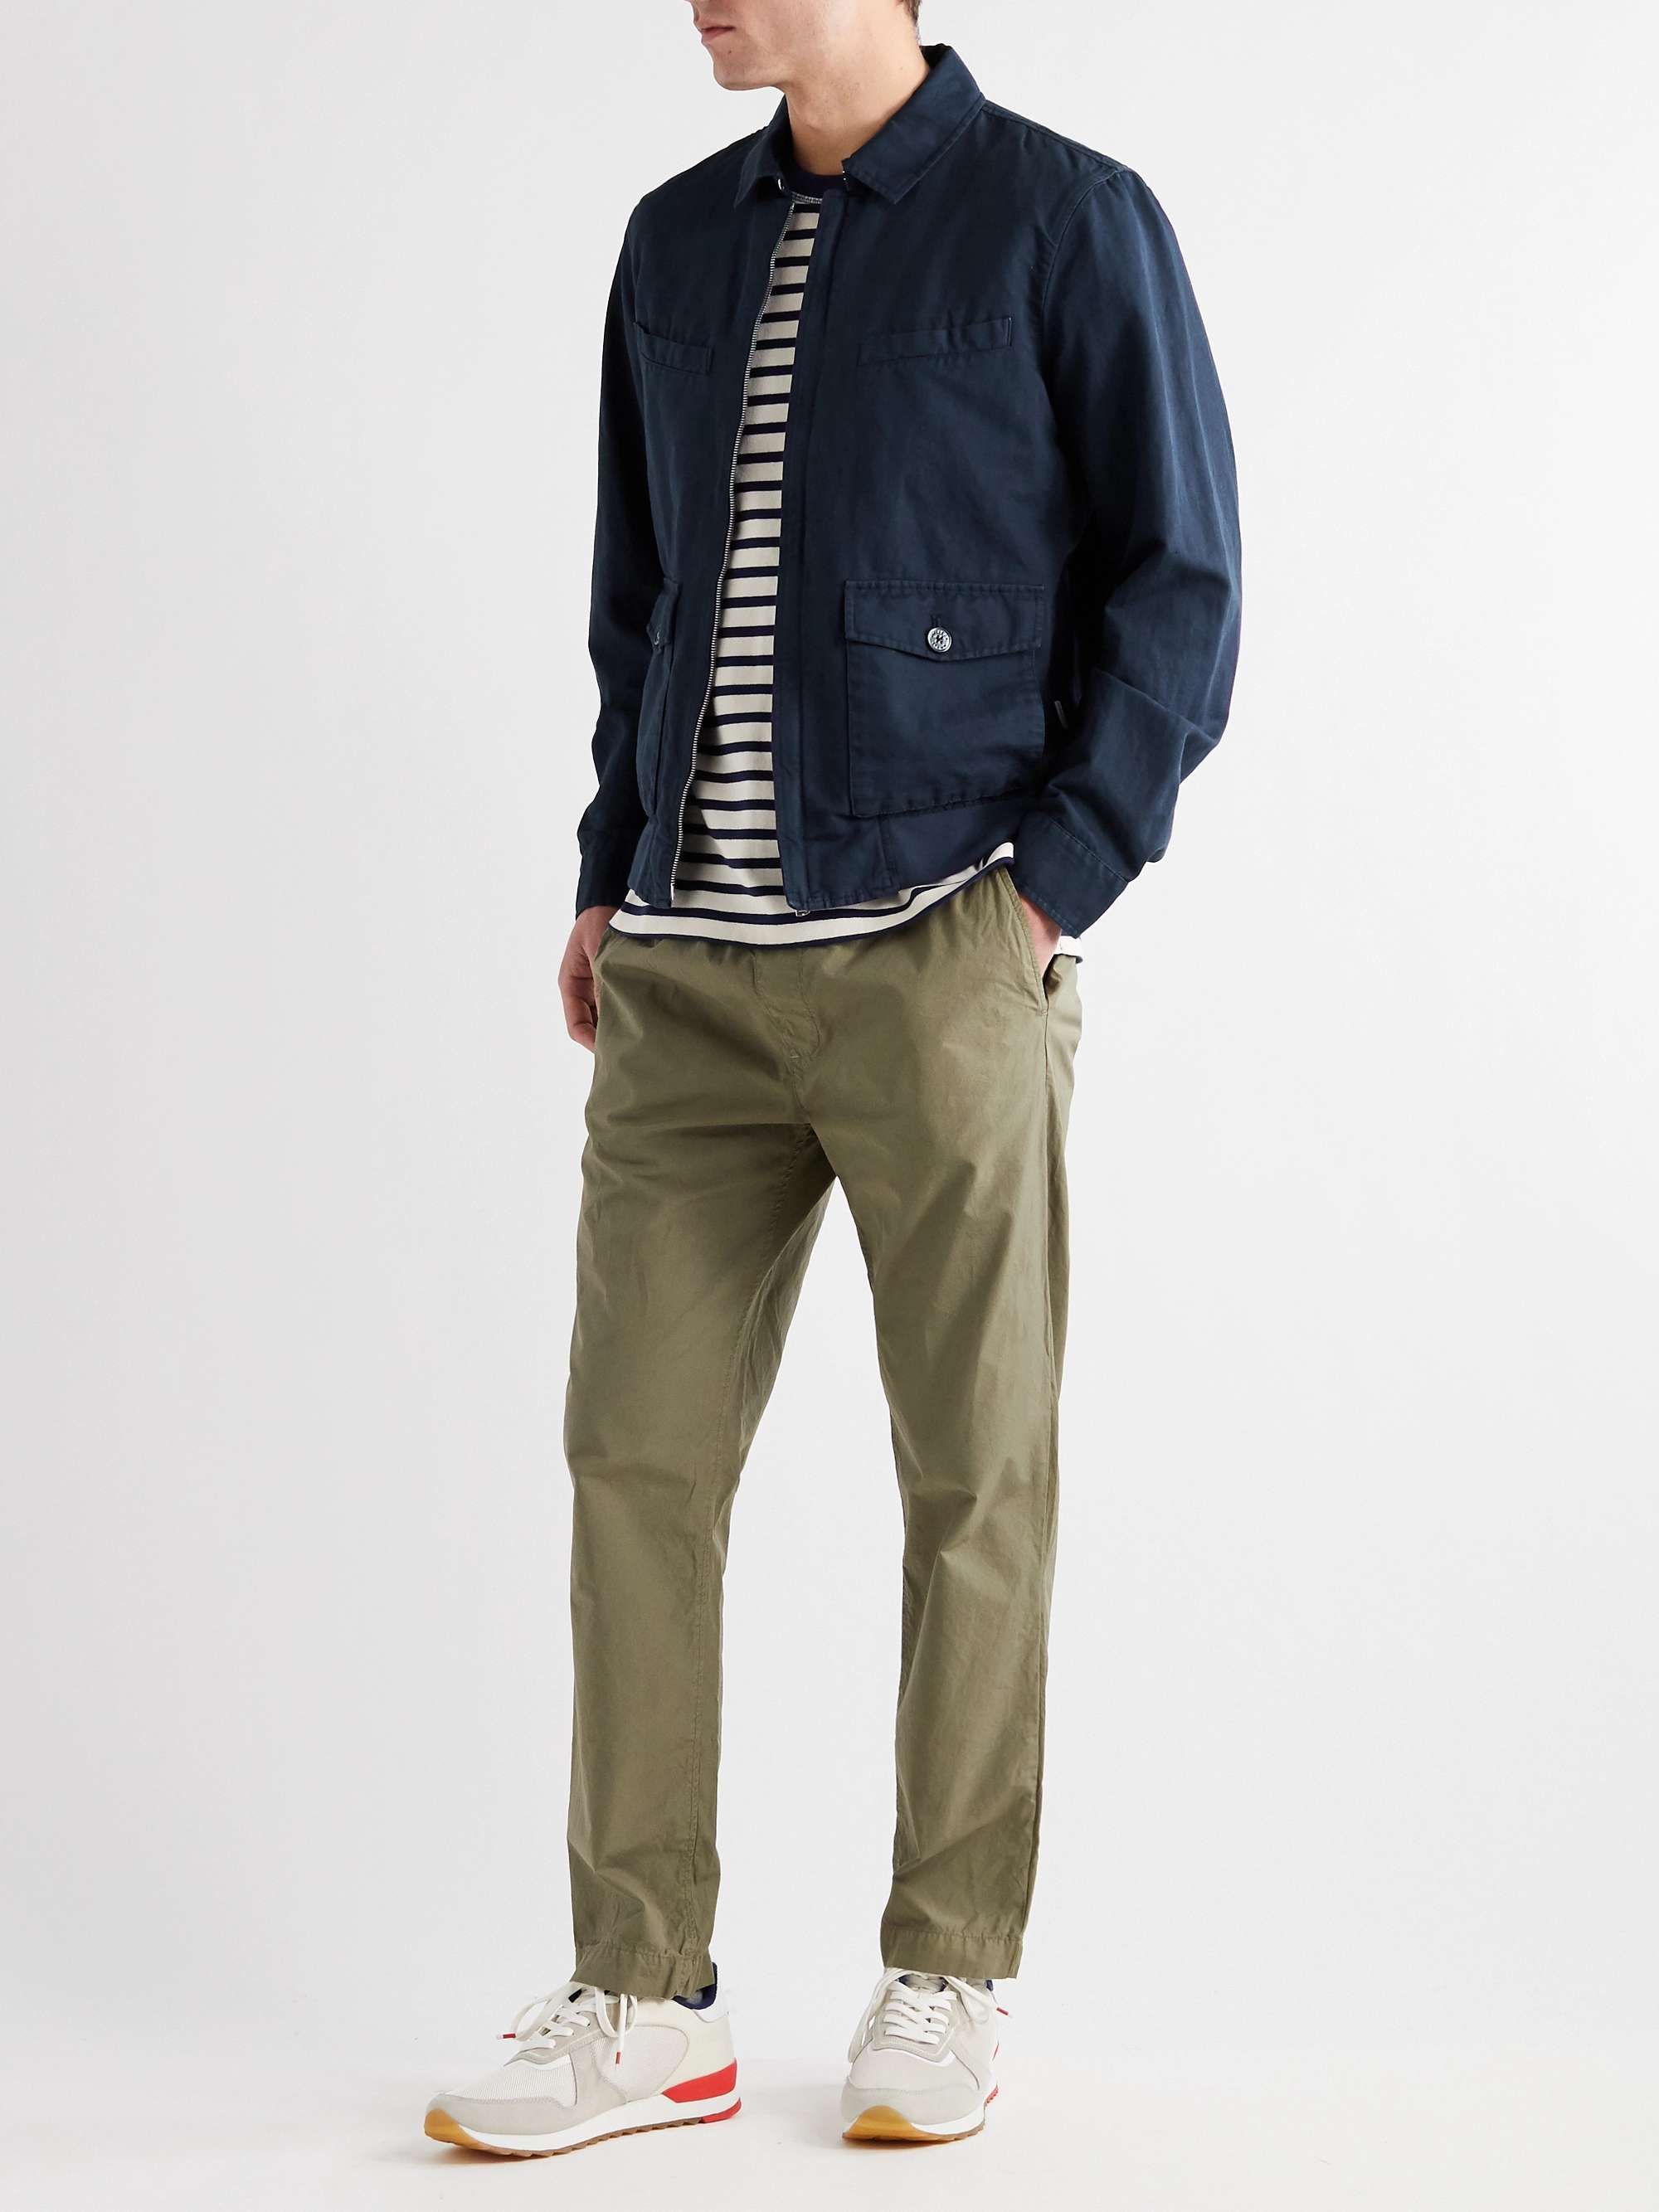 ORLEBAR BROWN Bowers Slim-Fit Linen and Cotton-Blend Jacket